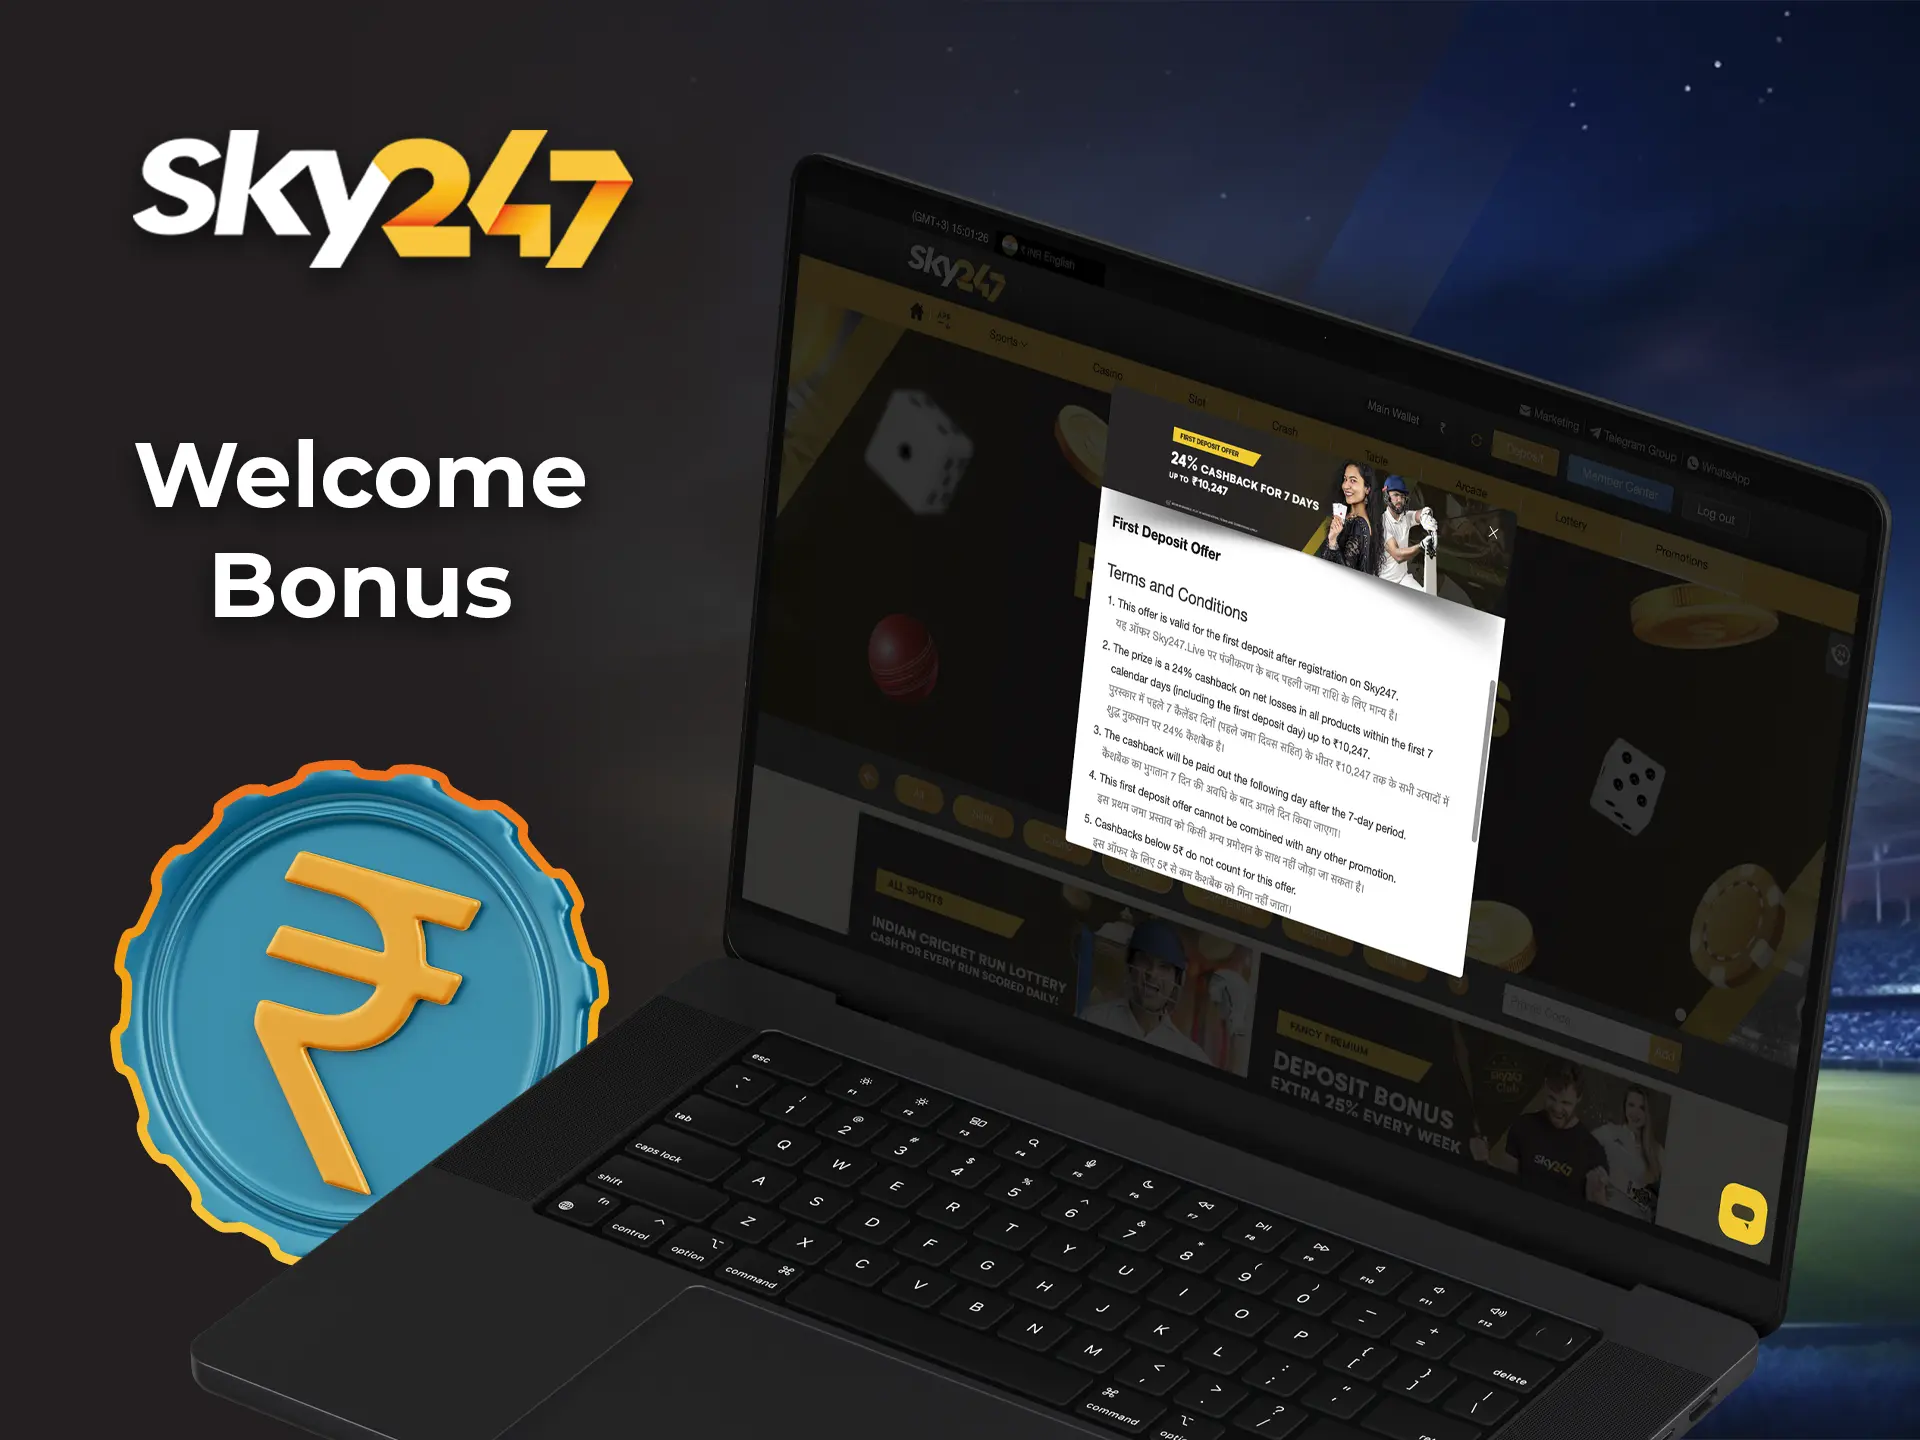 Claim your welcome bonus and make your bets big at Sky247 Casino.